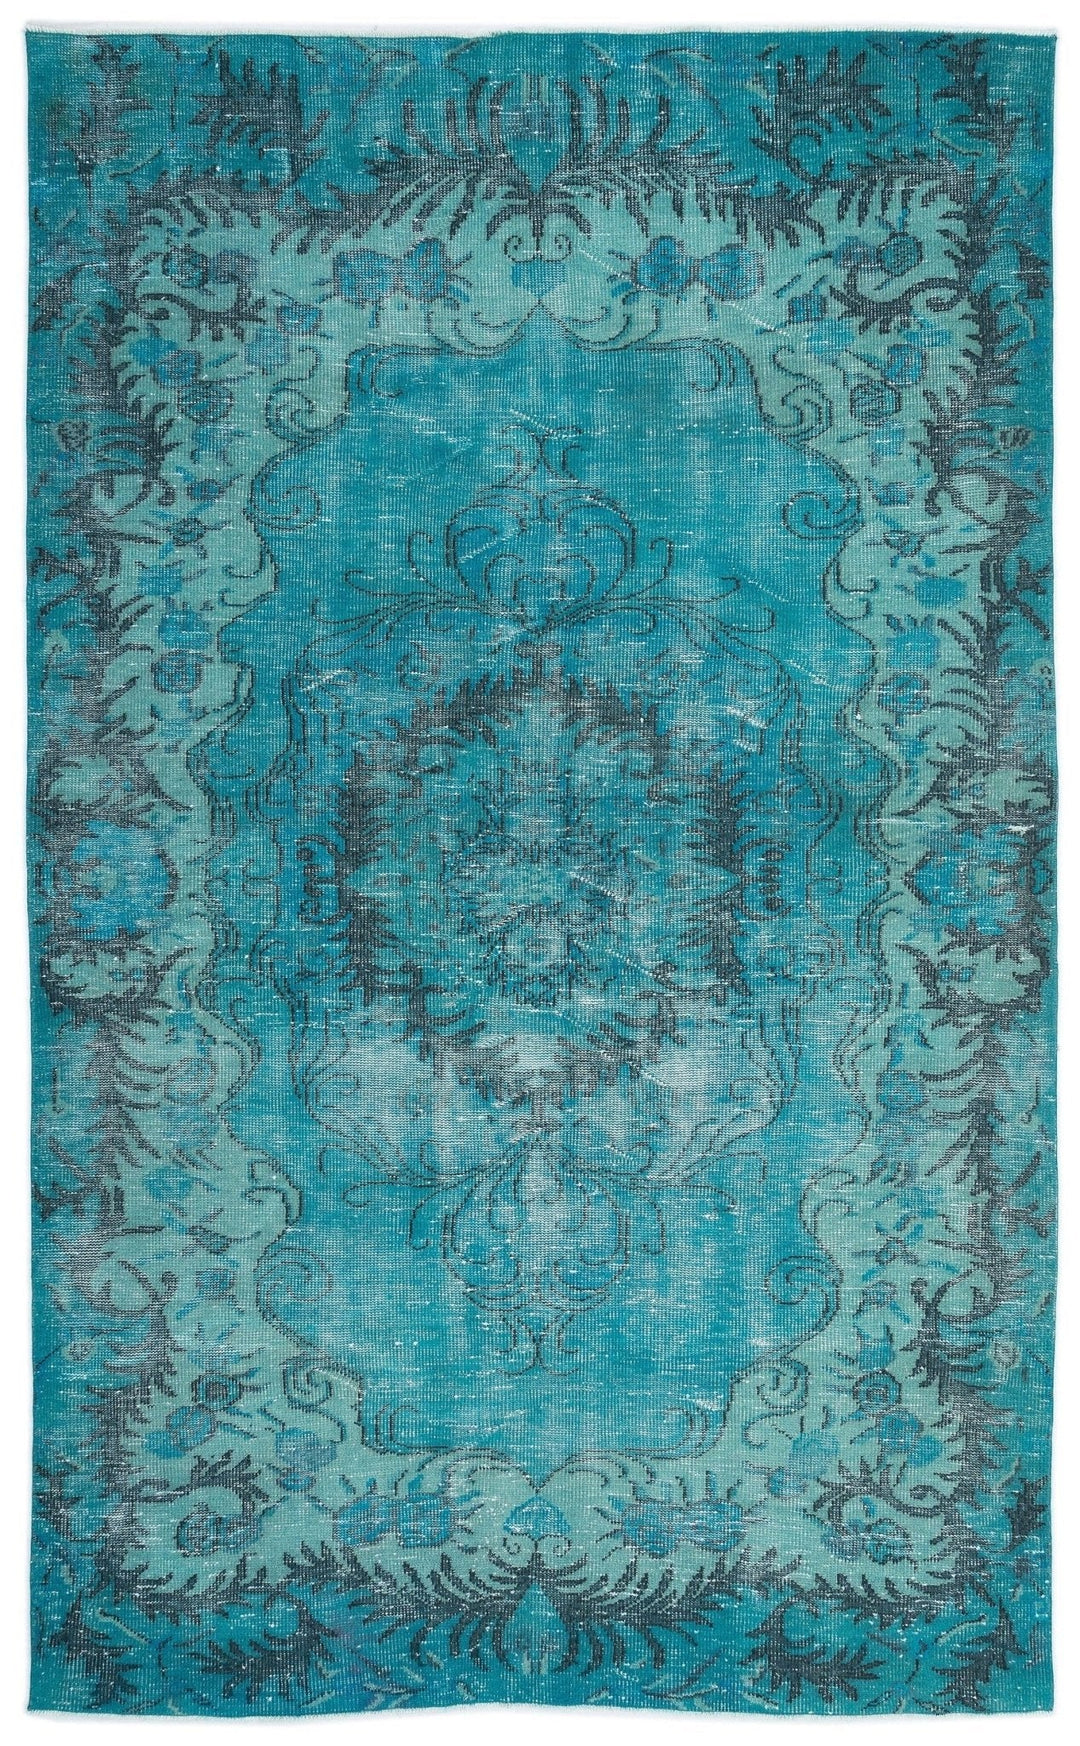 Athens 15875 Turquoise Tumbled Wool Hand Woven Carpet 180 x 293